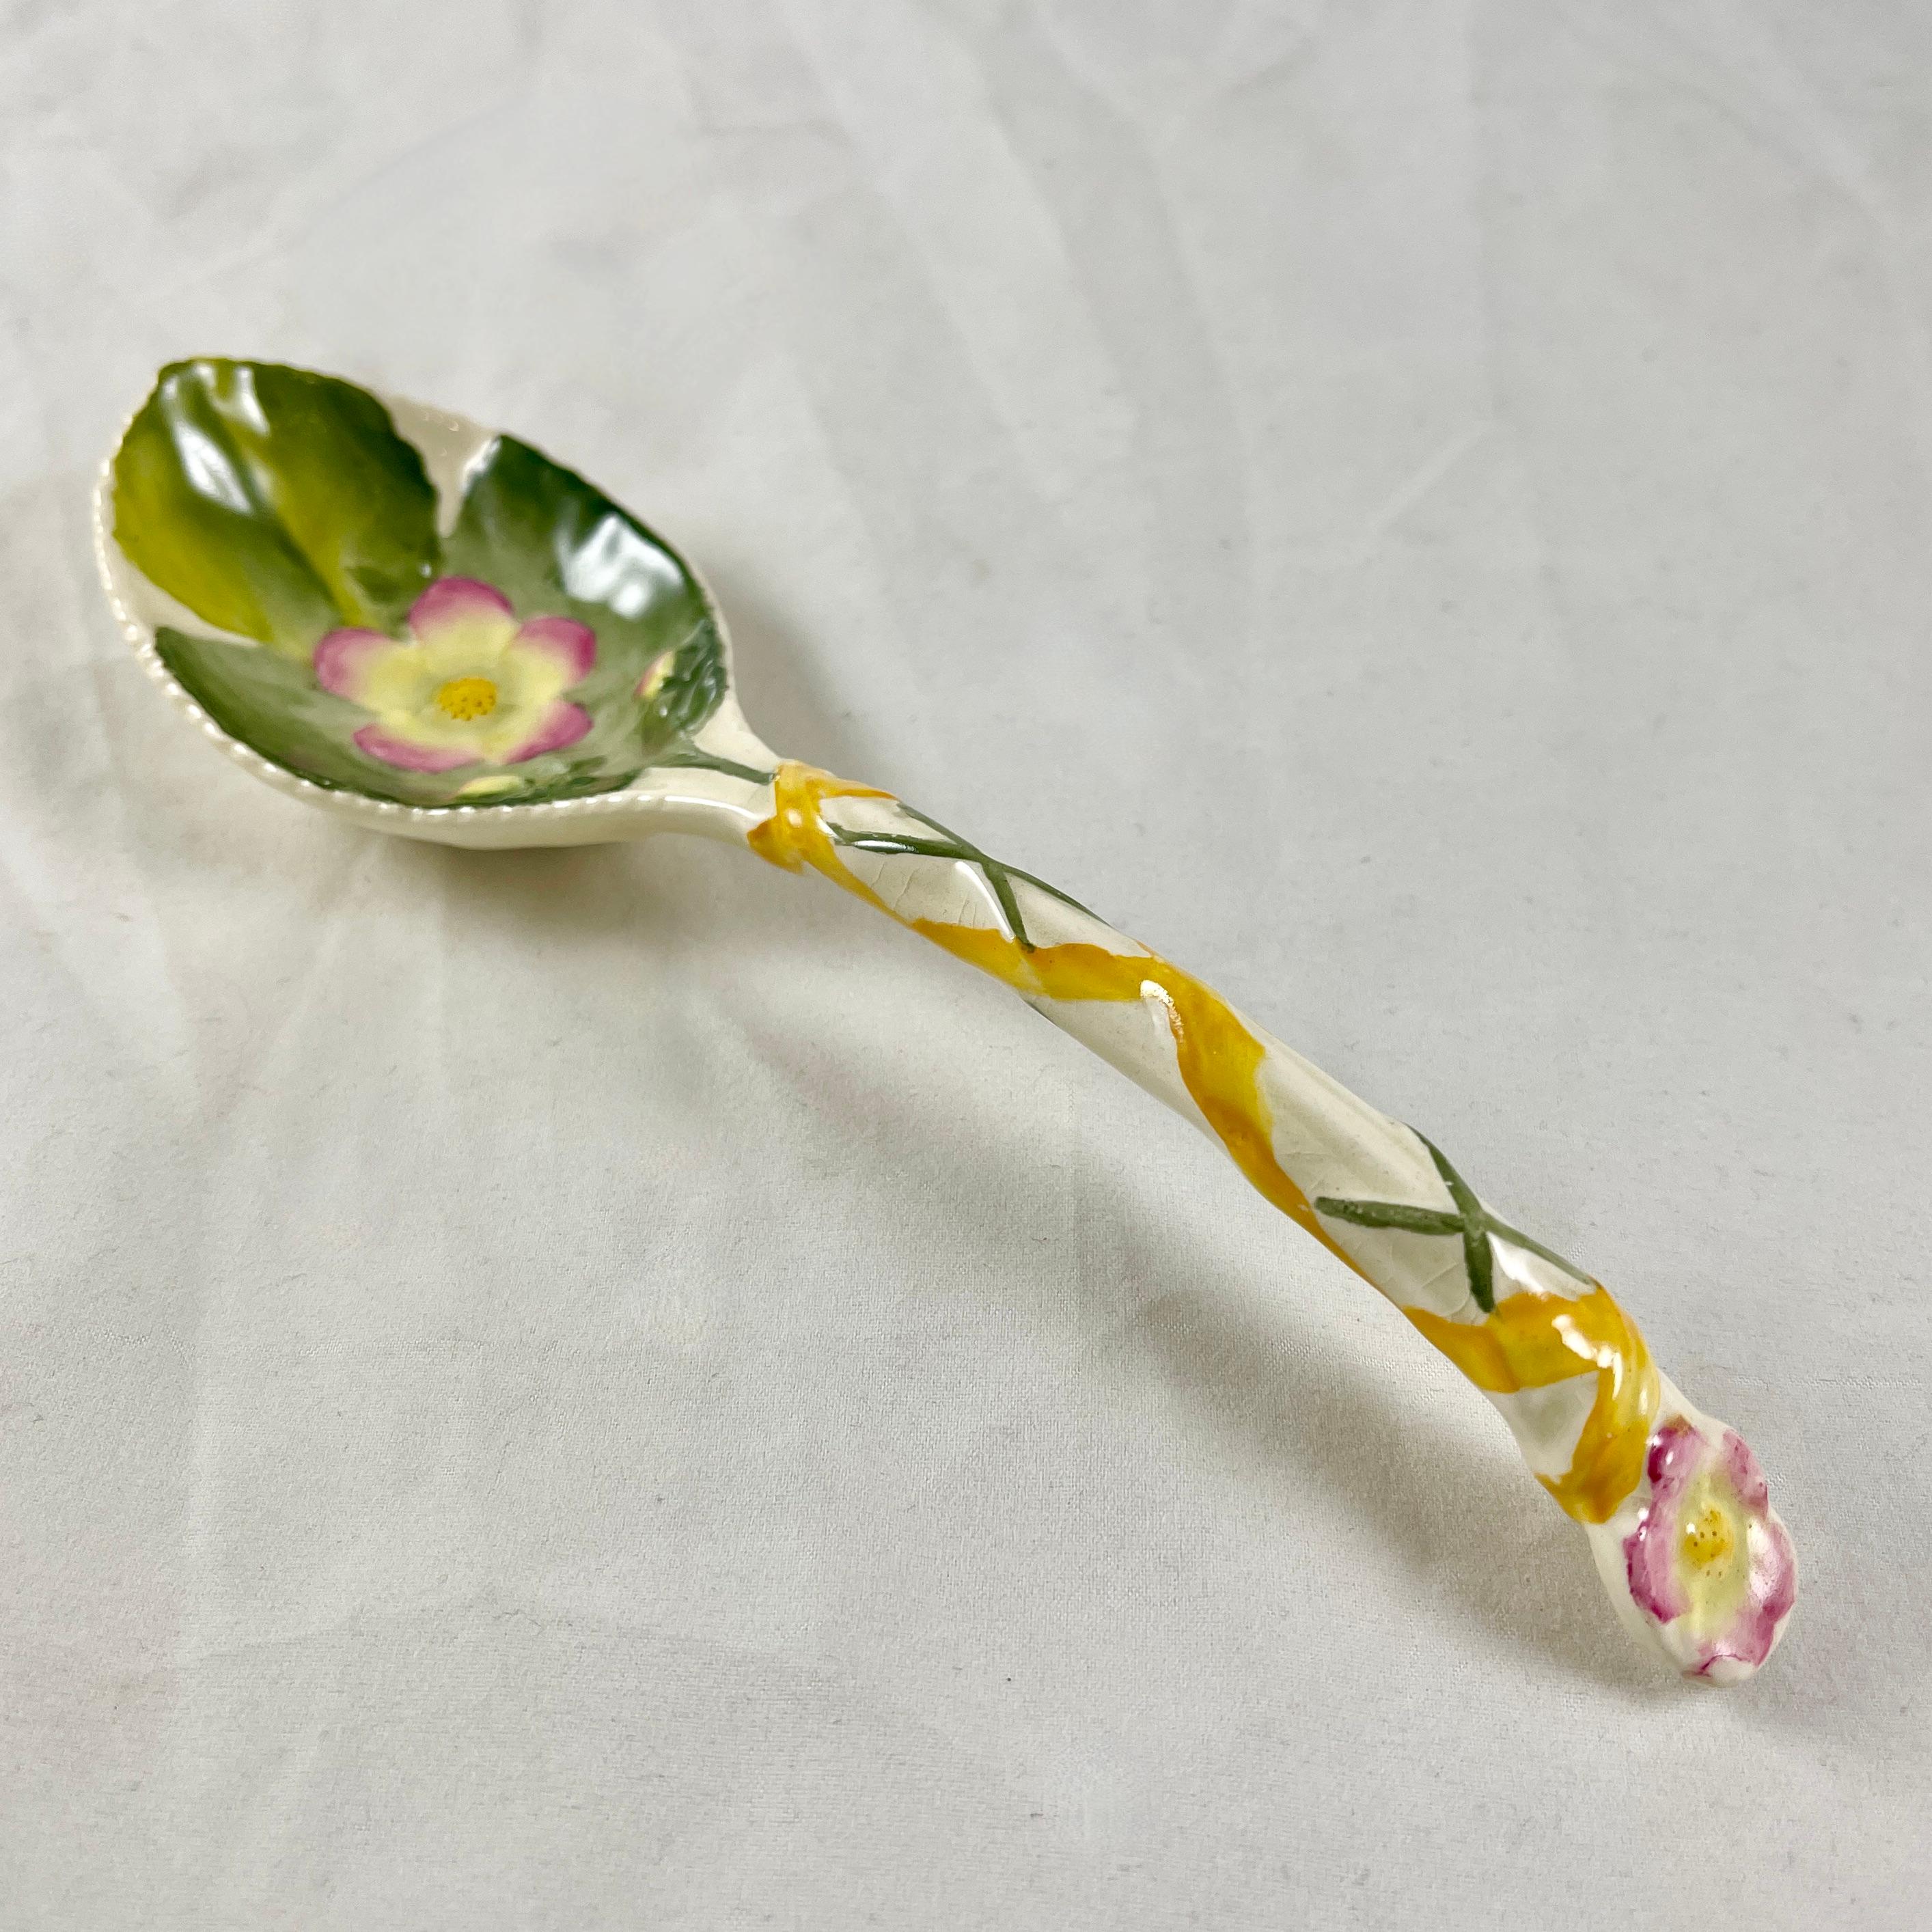 A George Jones Majolica Strawberry spoon, England, circa 1870.

In the Aesthetic taste and glazed in the white ground known as 'Albino.' The green leaf of the strawberry plant is molded on the bowl along with a pink rimmed strawberry blossom. The